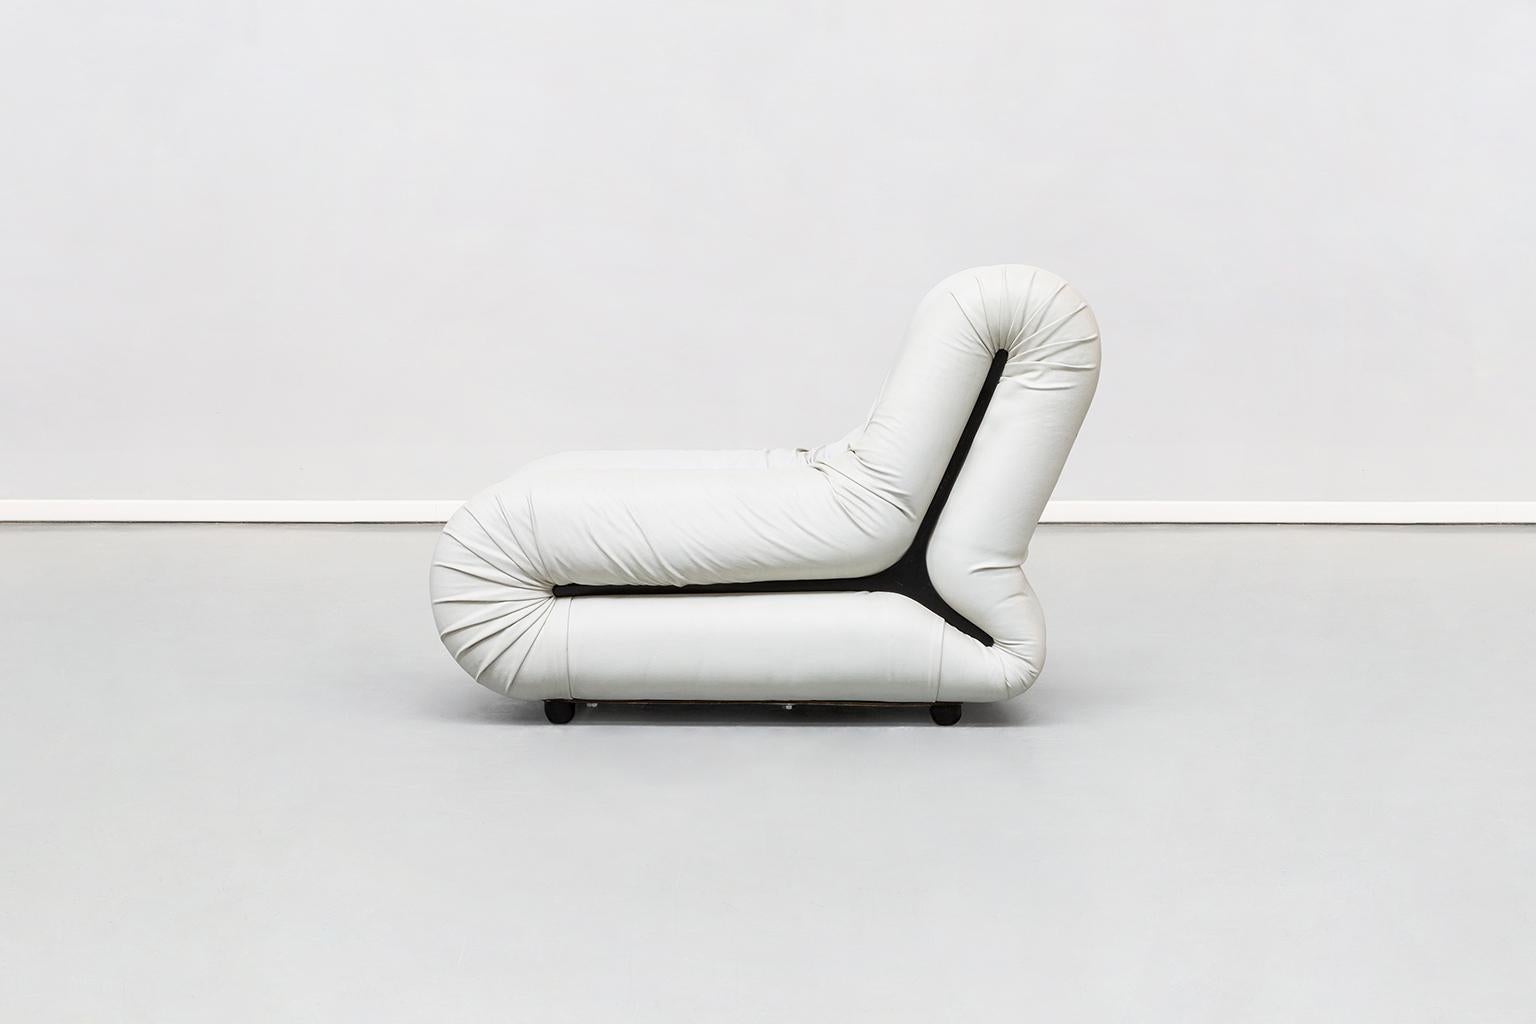 Italian Space Age, white leather Pagrù armchair, by 1P, Italy, 1968
Extremely rare white leather armchair Pagrú, produced by 1P, Italy, in 1968.
Entirely covered with their original brilliant white leather, with a black profile on each side.